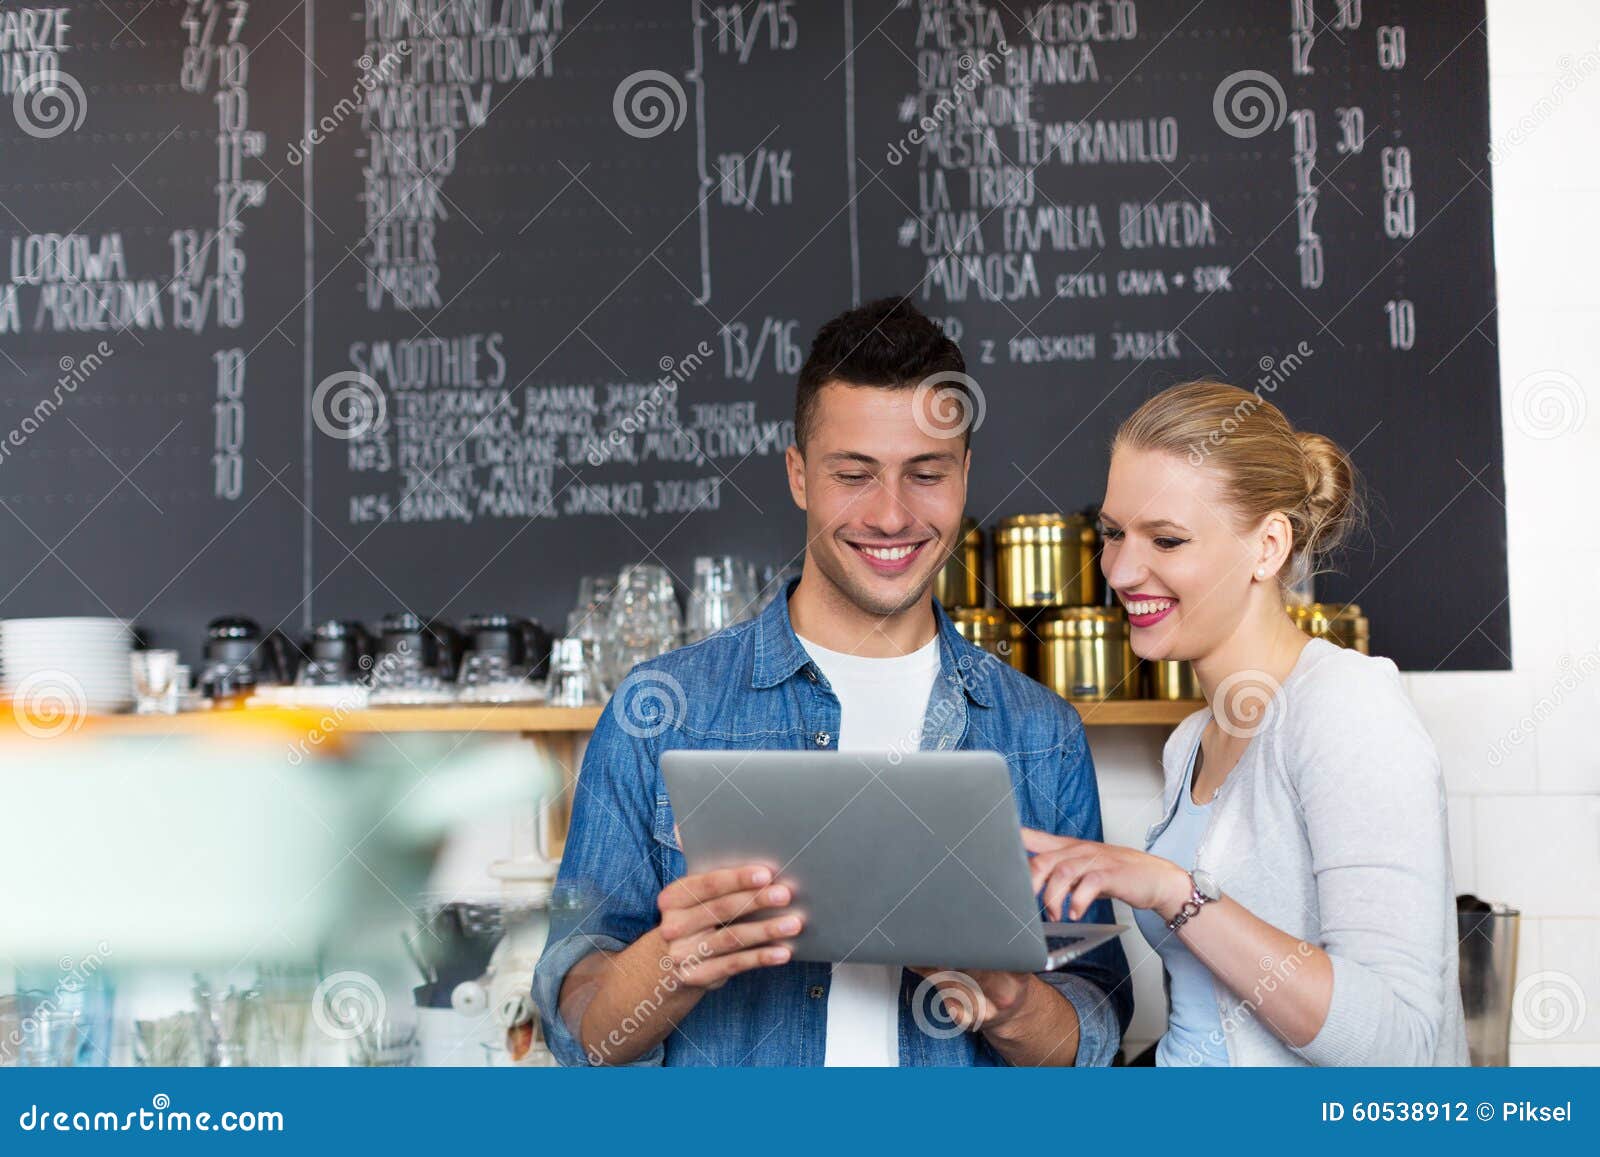 small business owners in coffee shop